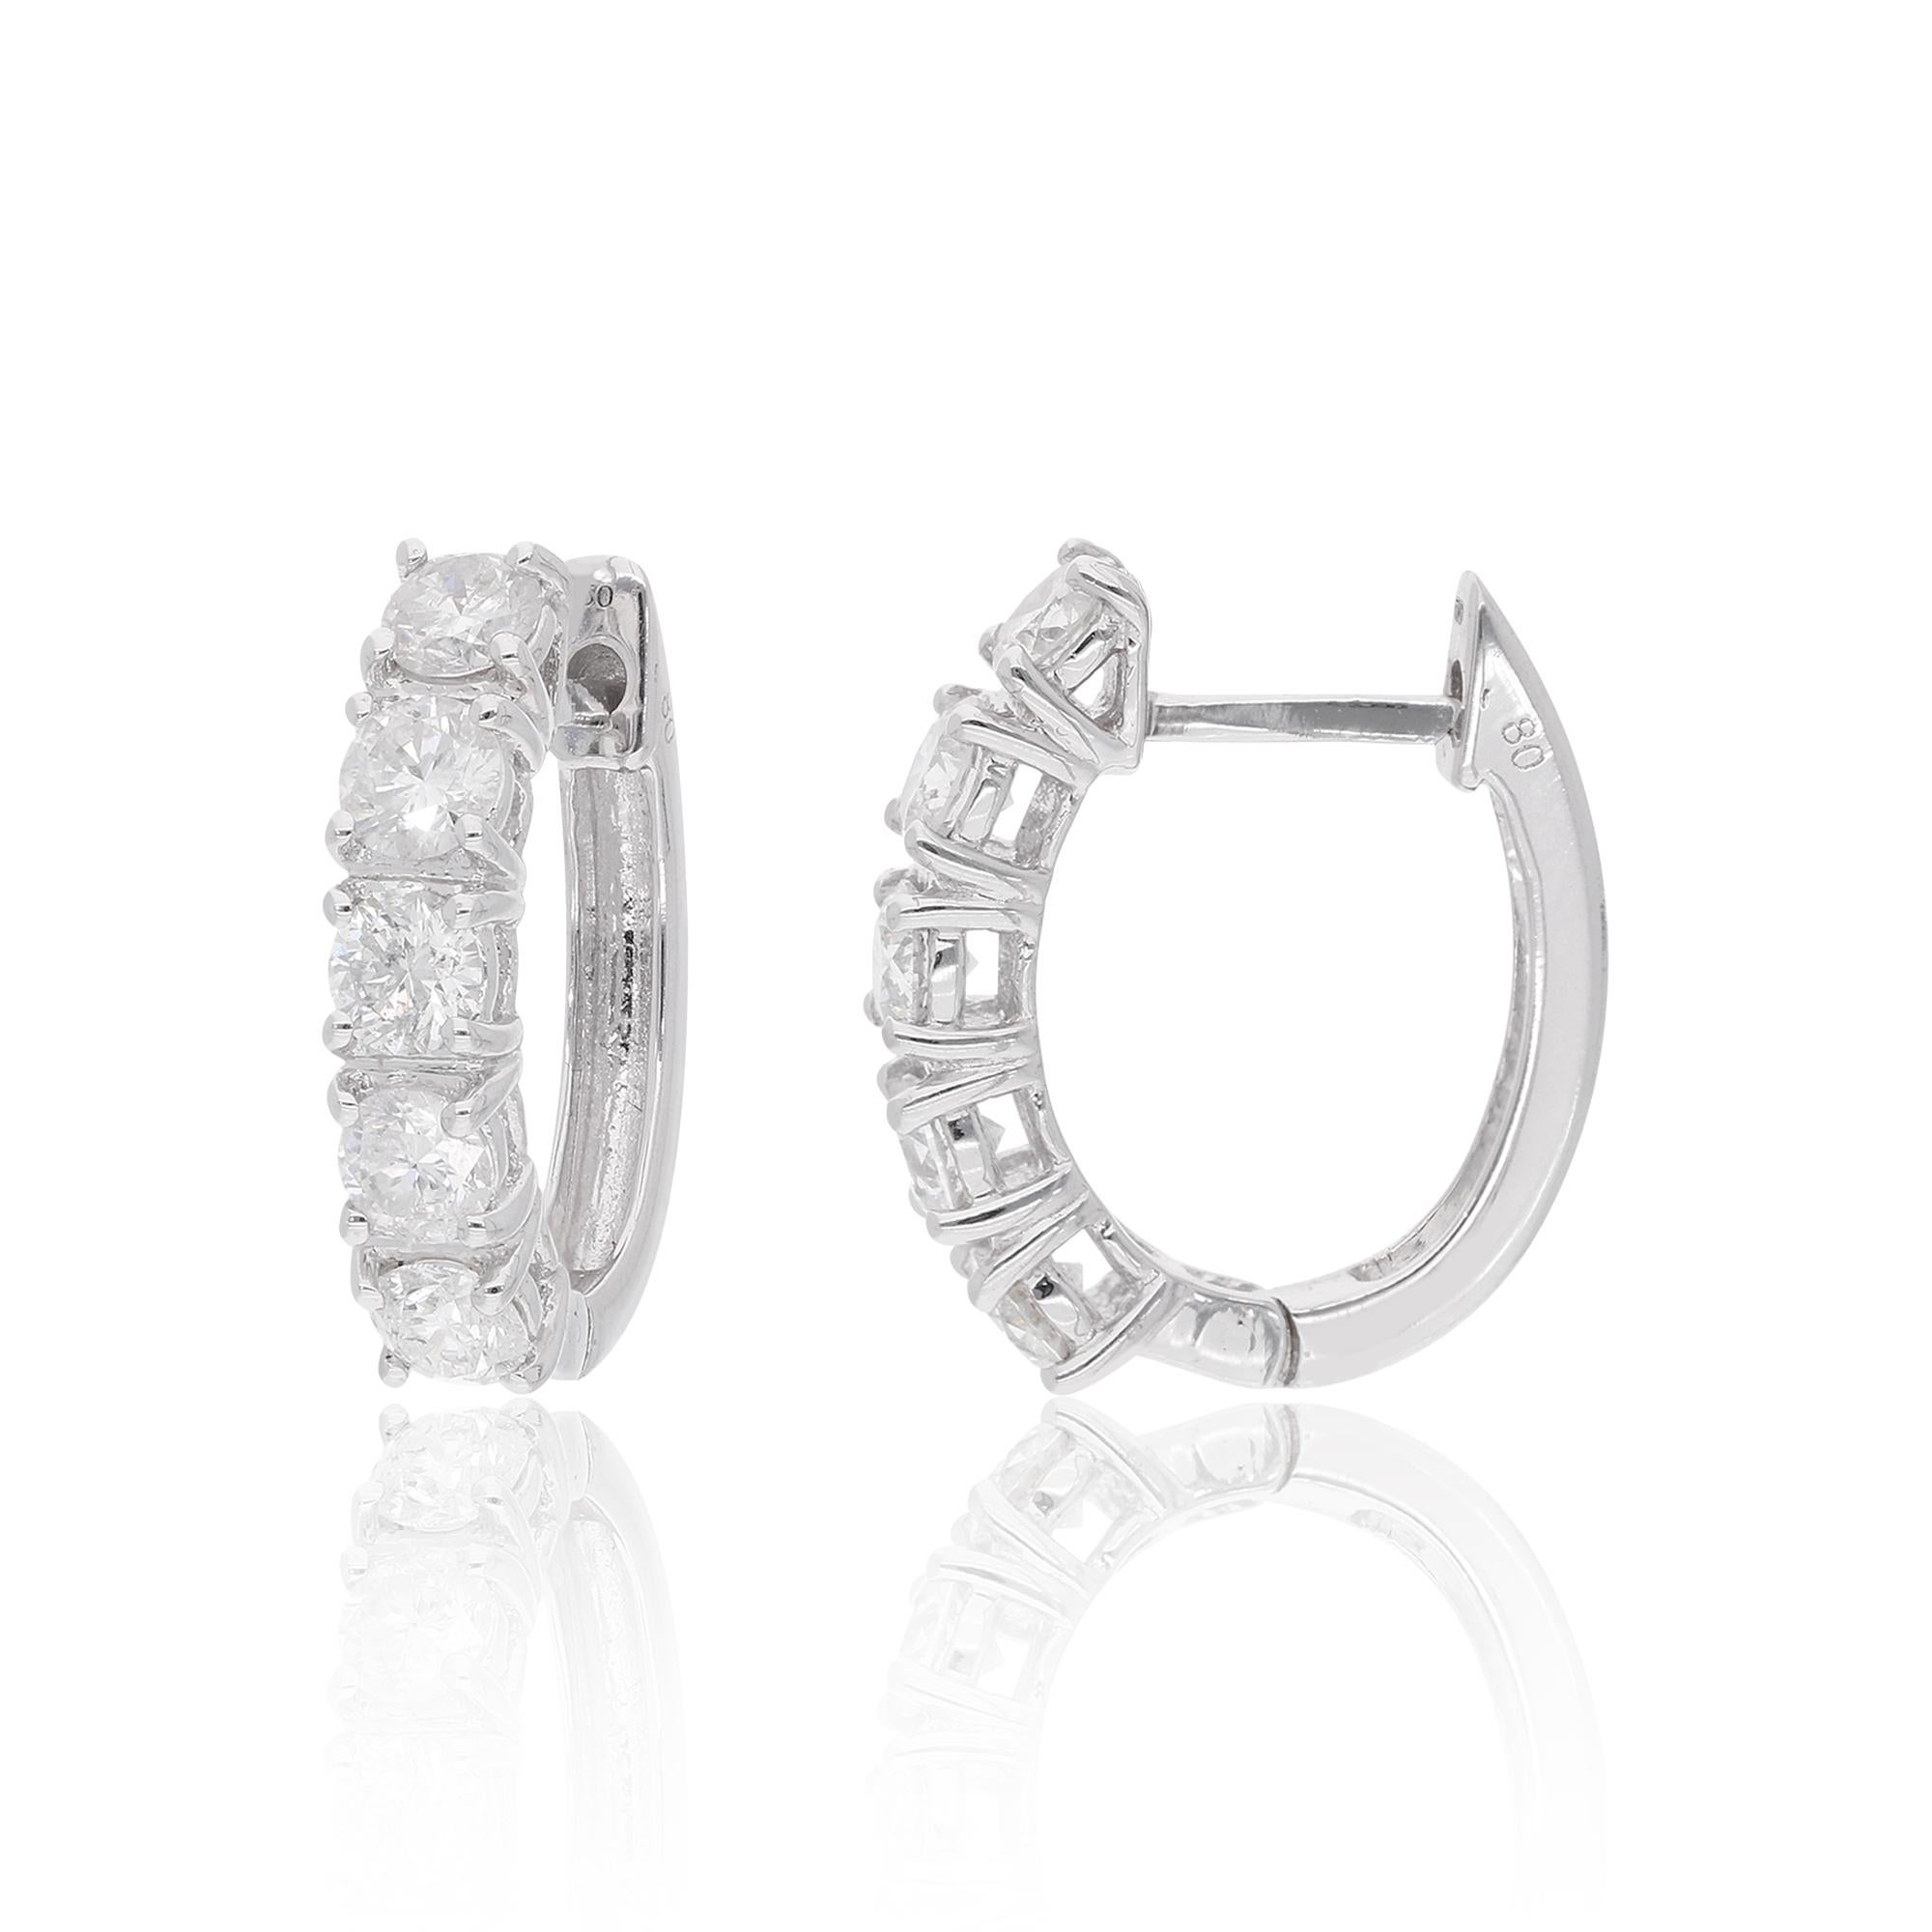 These Dainty Diamond Hoop Earrings with 2.2 ct. Genuine Diamonds are a promise of perfection and purity. These earrings are set in 14k Solid White Gold. You can choose these huggies in 10k/14k/18k Rose Gold/White Gold/Yellow Gold.

These are perfect